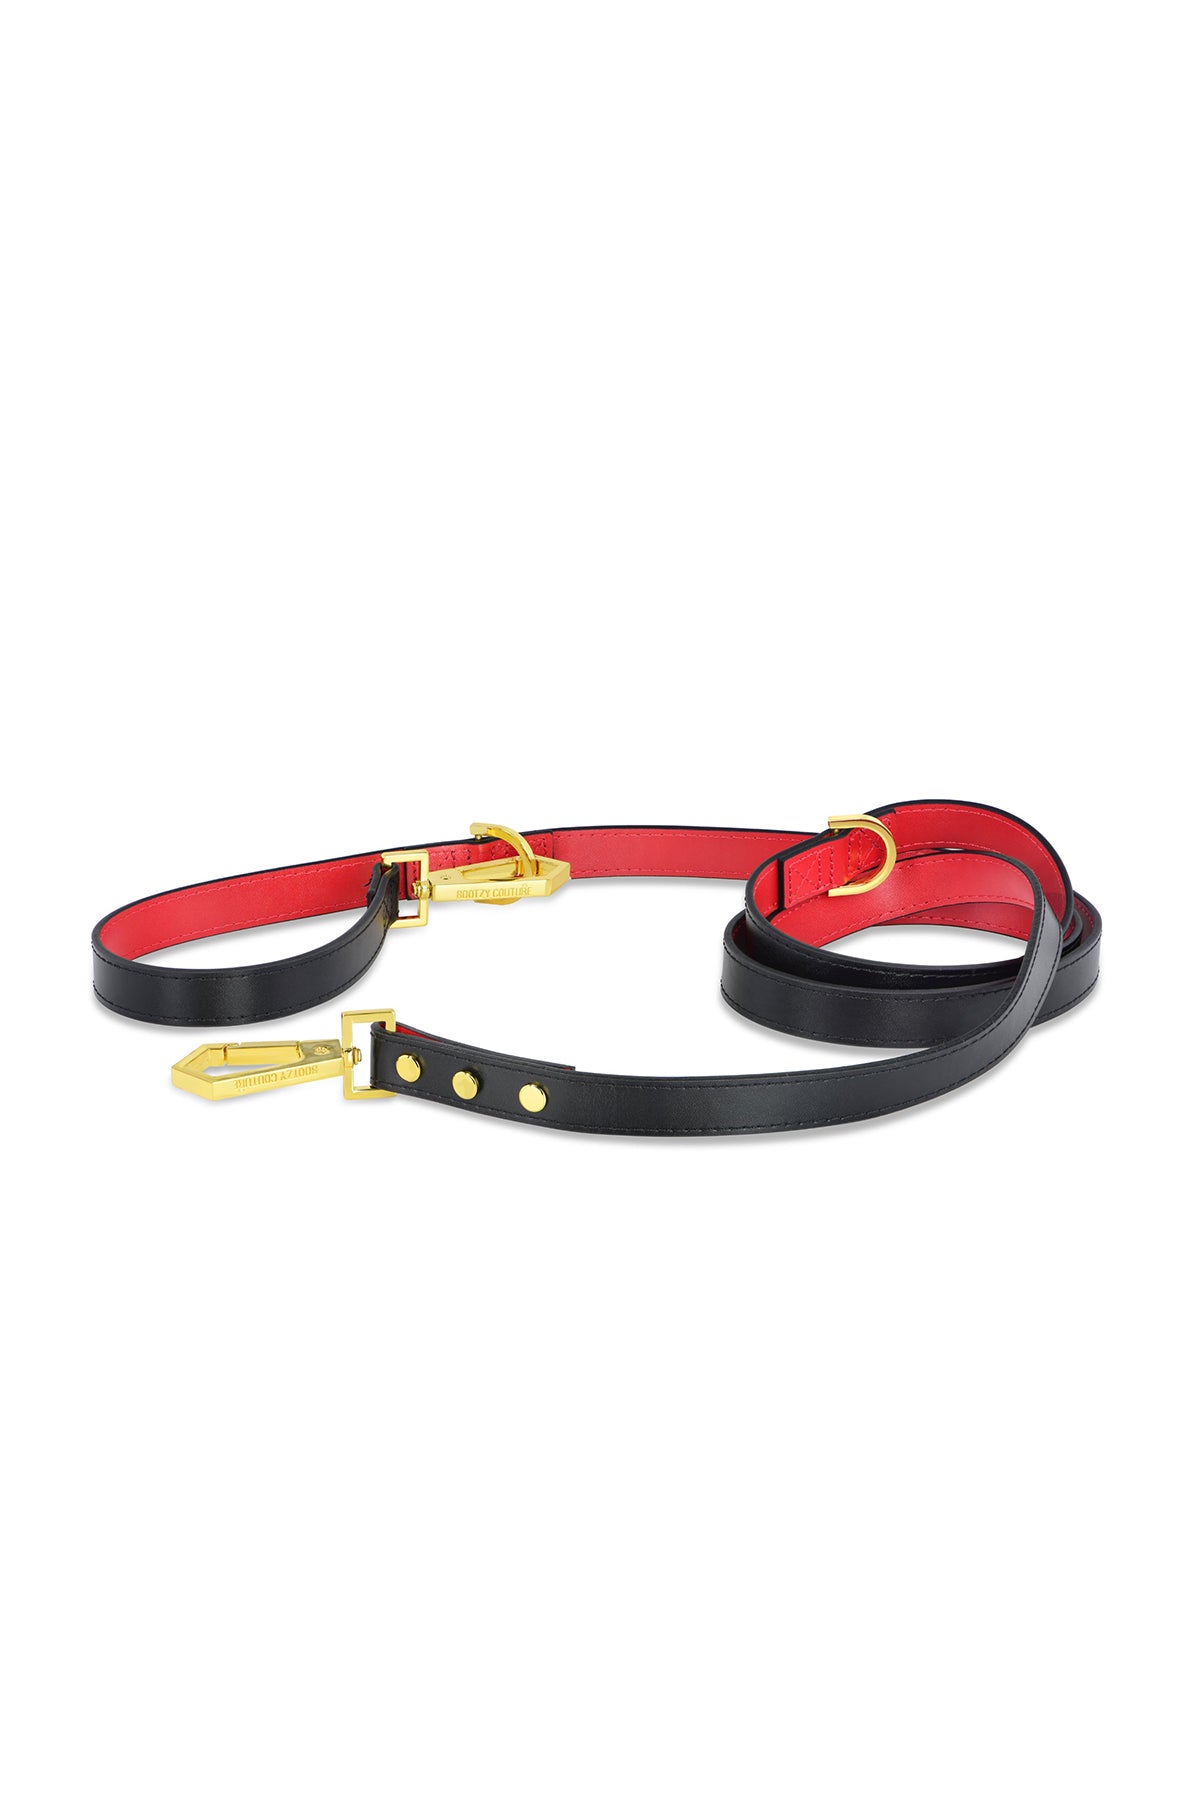 BOOTZY COUTURE | DO THE PRANCE LEASH